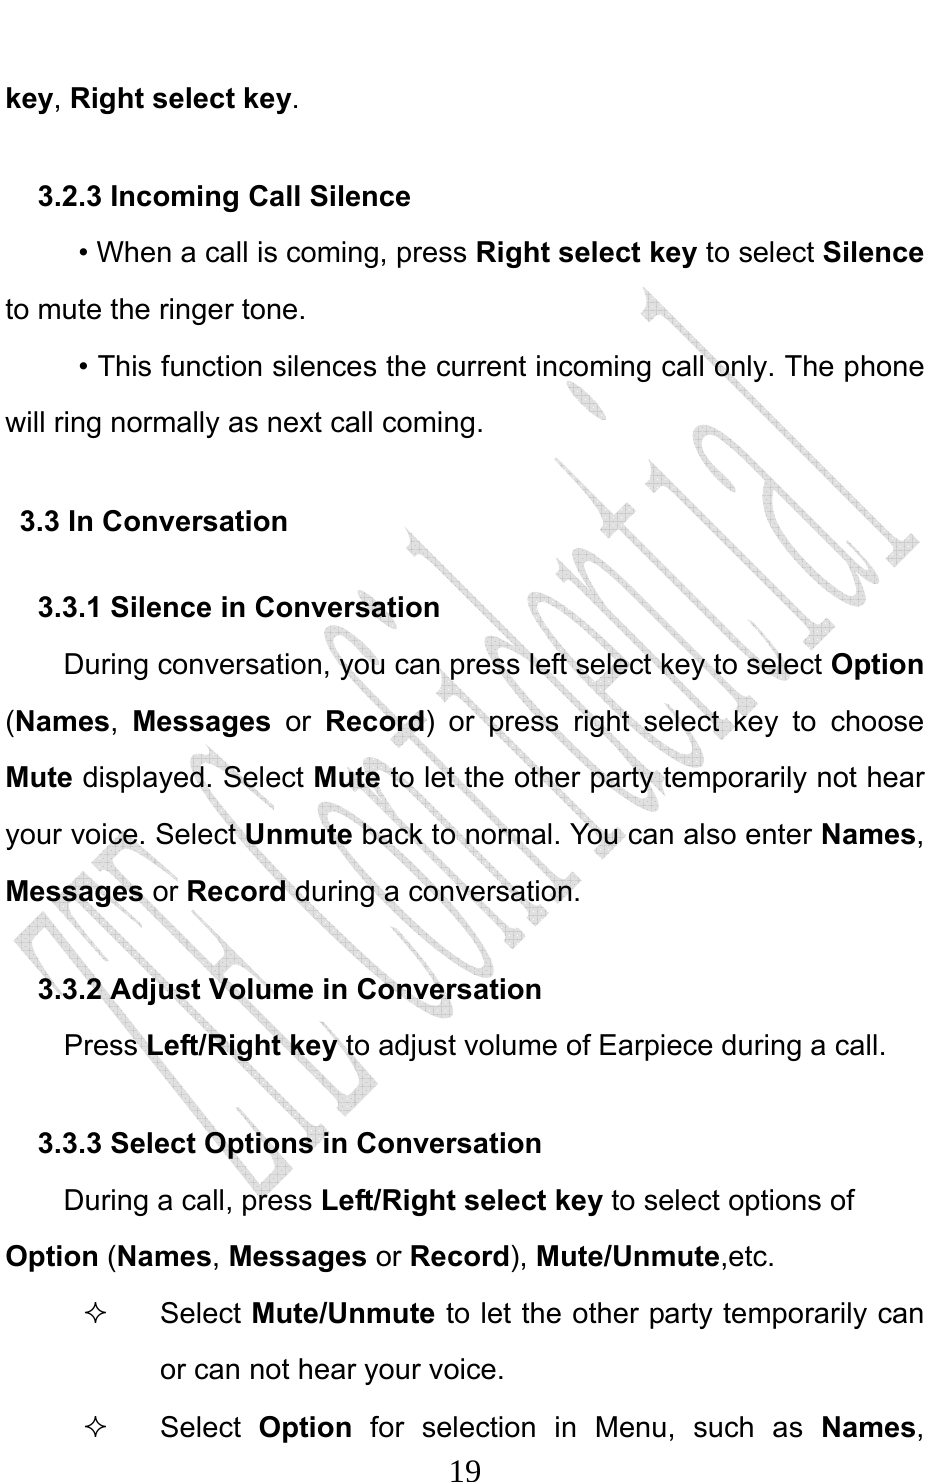                              19key, Right select key. 3.2.3 Incoming Call Silence      • When a call is coming, press Right select key to select Silence to mute the ringer tone.      • This function silences the current incoming call only. The phone will ring normally as next call coming. 3.3 In Conversation 3.3.1 Silence in Conversation During conversation, you can press left select key to select Option (Names,  Messages  or Record) or press right select key to choose Mute displayed. Select Mute to let the other party temporarily not hear your voice. Select Unmute back to normal. You can also enter Names, Messages or Record during a conversation. 3.3.2 Adjust Volume in Conversation     Press Left/Right key to adjust volume of Earpiece during a call. 3.3.3 Select Options in Conversation During a call, press Left/Right select key to select options of Option (Names, Messages or Record), Mute/Unmute,etc.  Select Mute/Unmute to let the other party temporarily can or can not hear your voice.  Select Option  for selection in Menu, such as Names, 